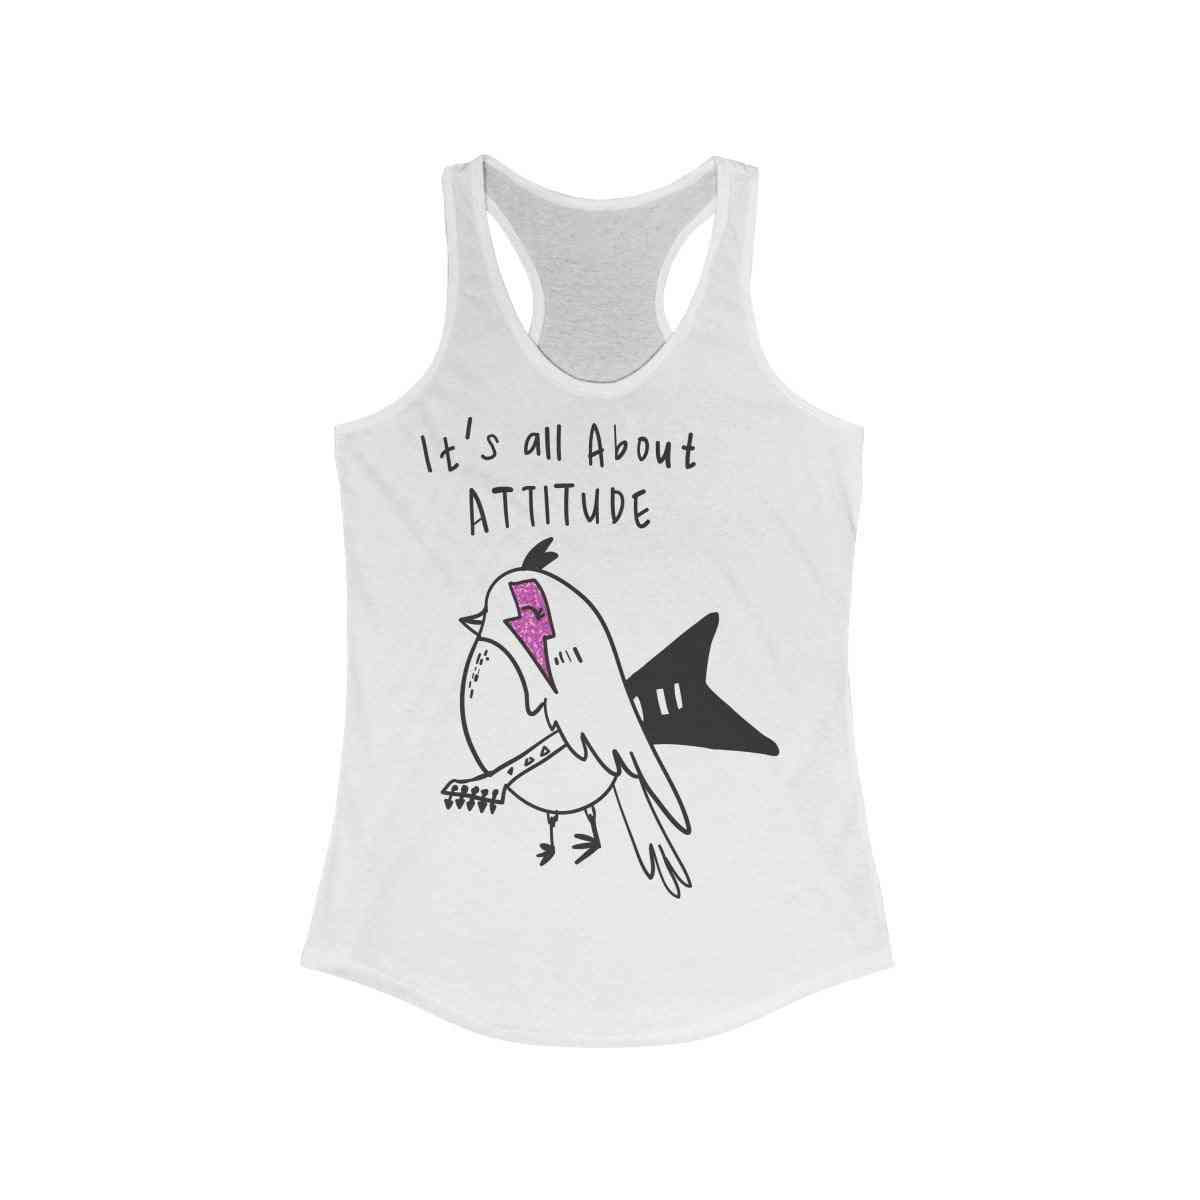 It's All About Attitude- Rocking Bird Tank Top